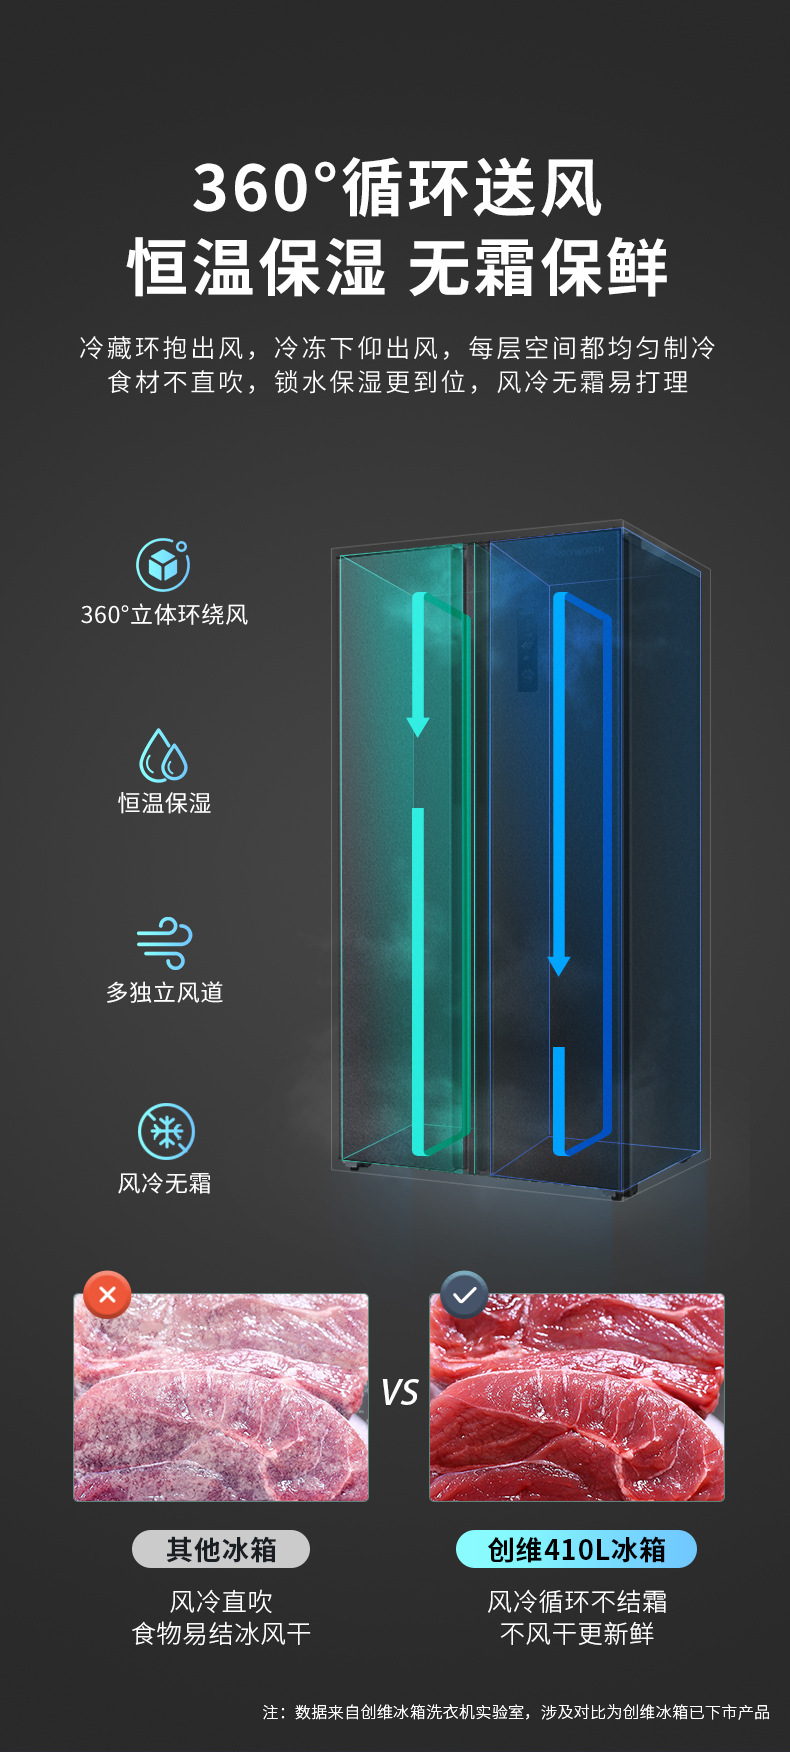 Skyworth Household Door-to-door Refrigerator Air-cooled Frost-free Energy-saving Frequency Conversion Intelligent Temperature Control Slim And Clean Taste 421 Liters.